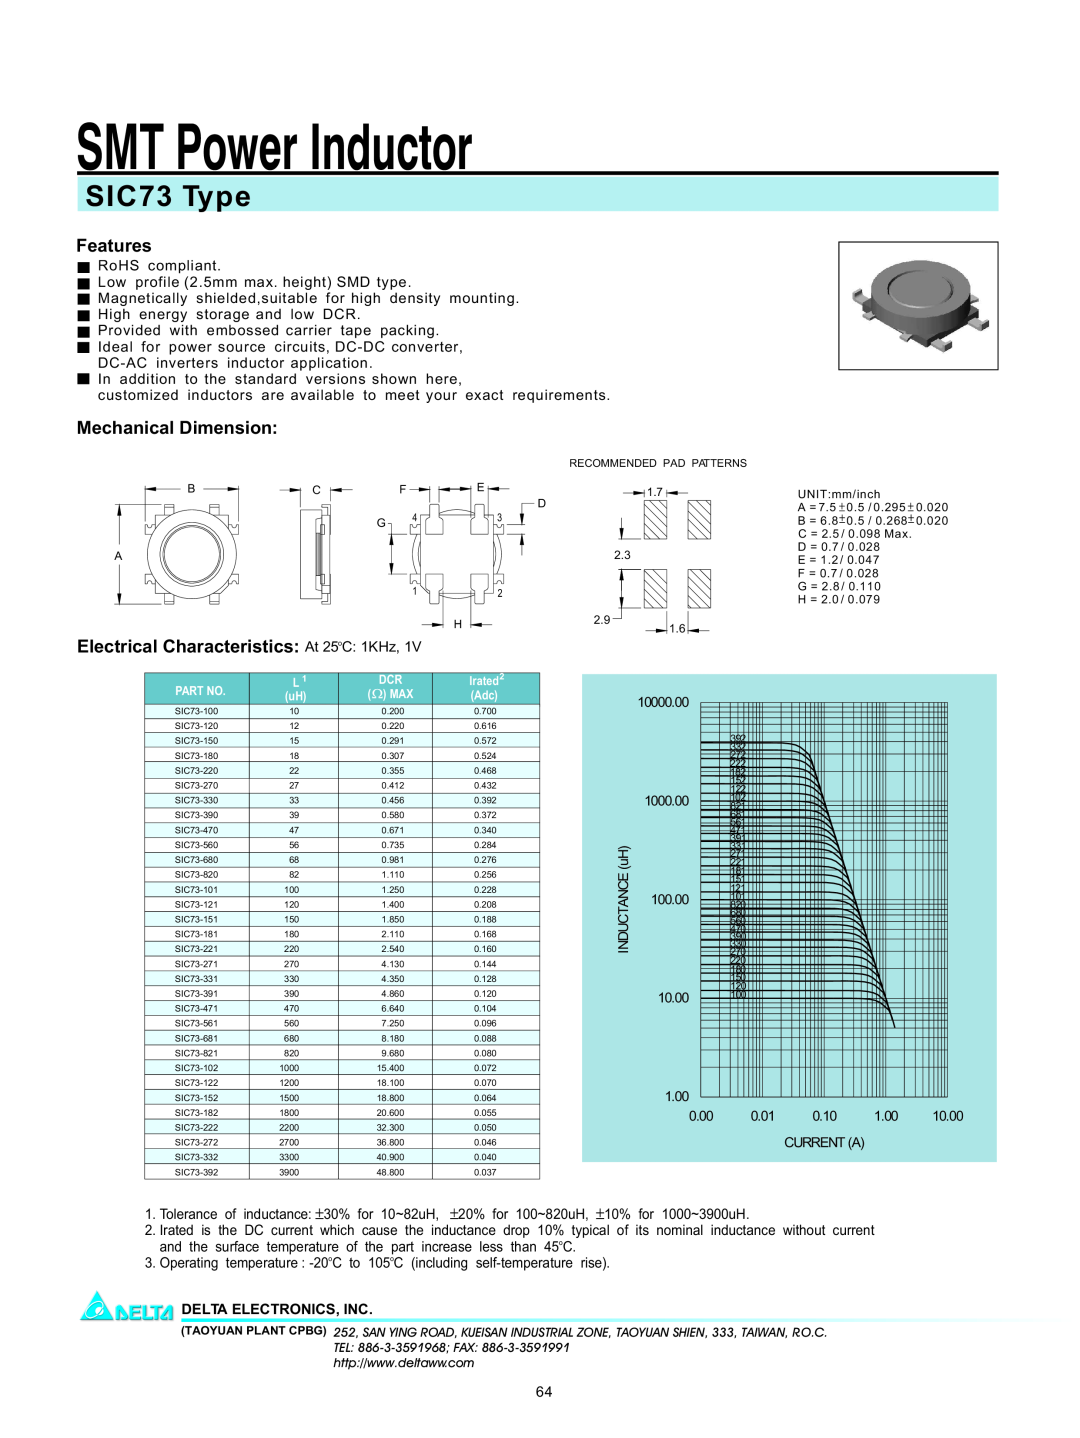 Delta Electronics manual SMT Power Inductor, SIC73 Type, Features, Mechanical Dimension, Delta Electronics, Inc 